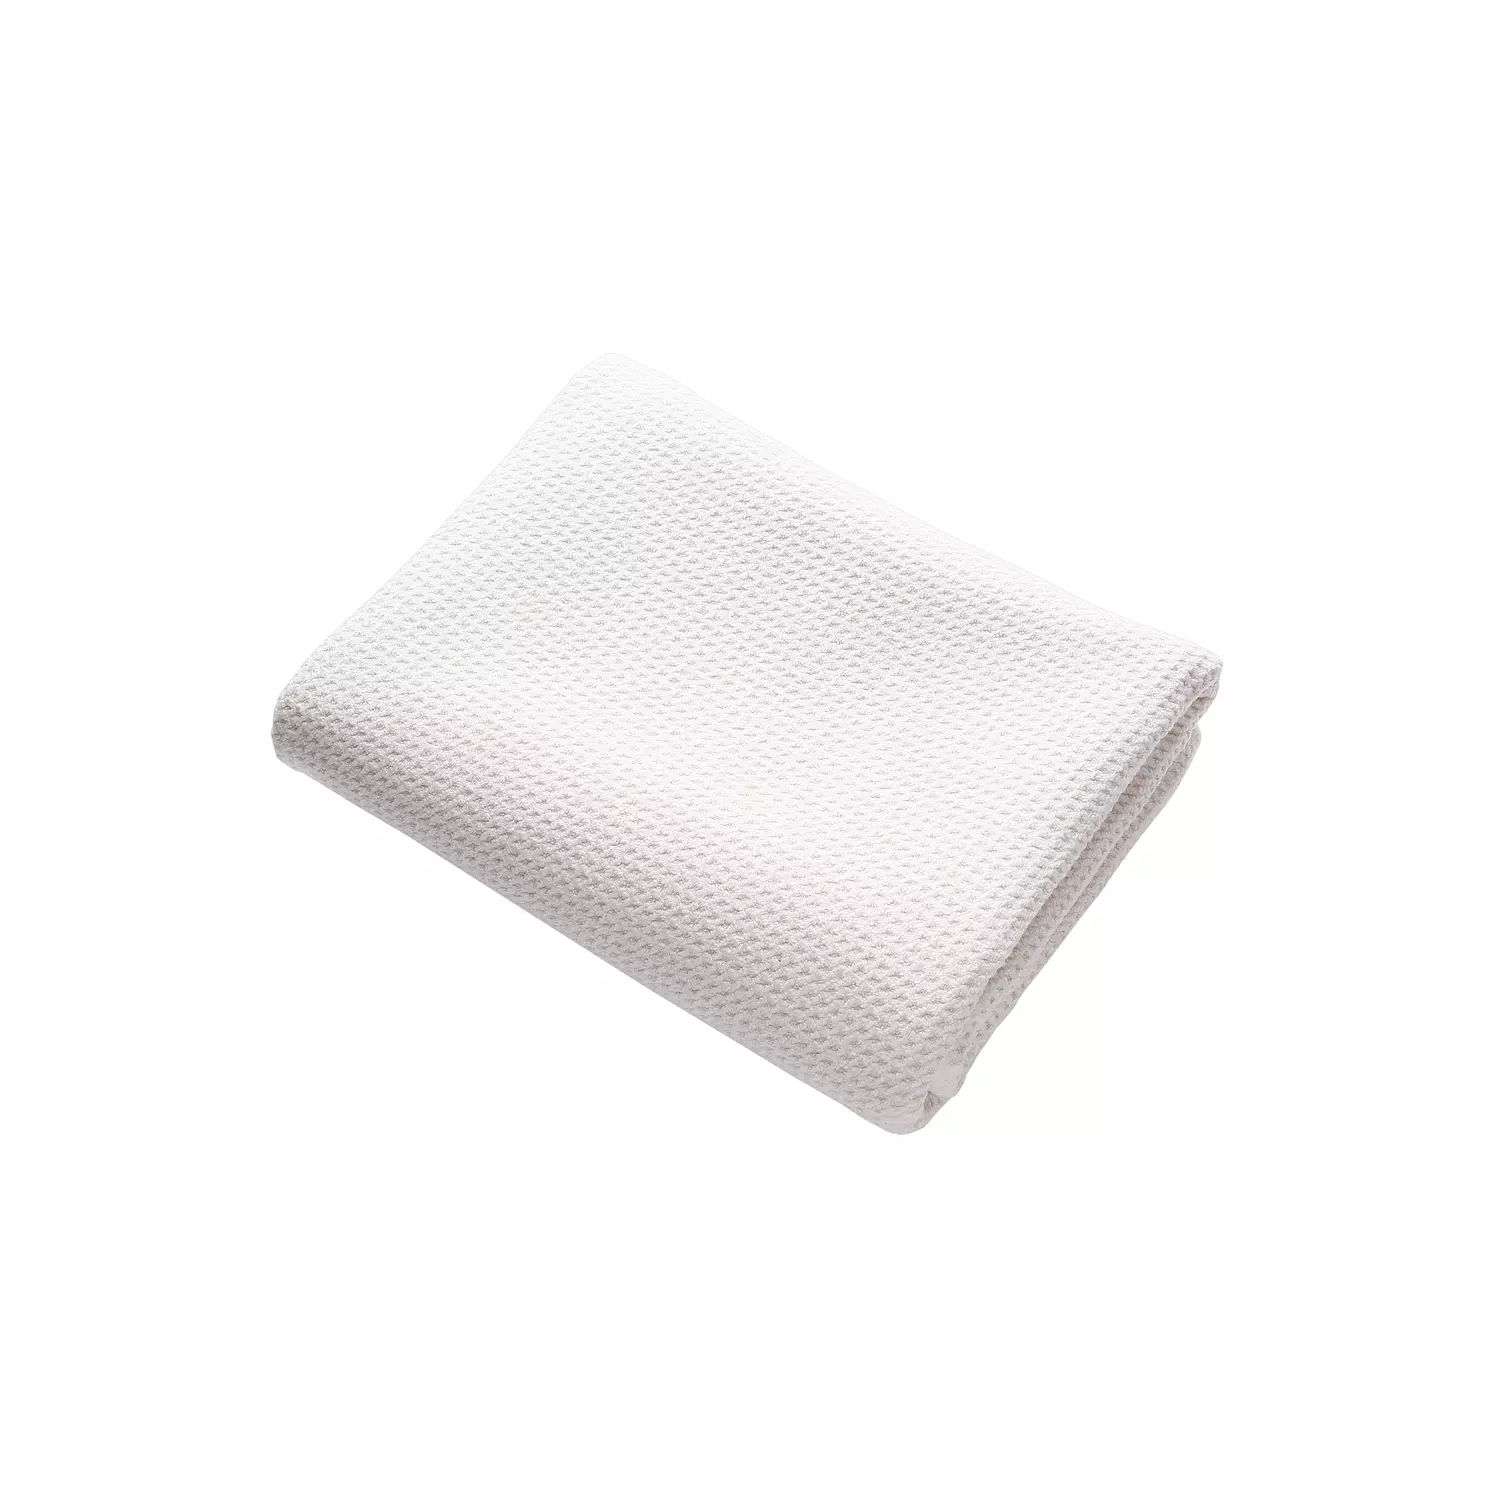 GREEN FIBER CARE 10 HAND & FACE TOWEL WAFFLE HAND AND FACE TOWEL, MILKY 1